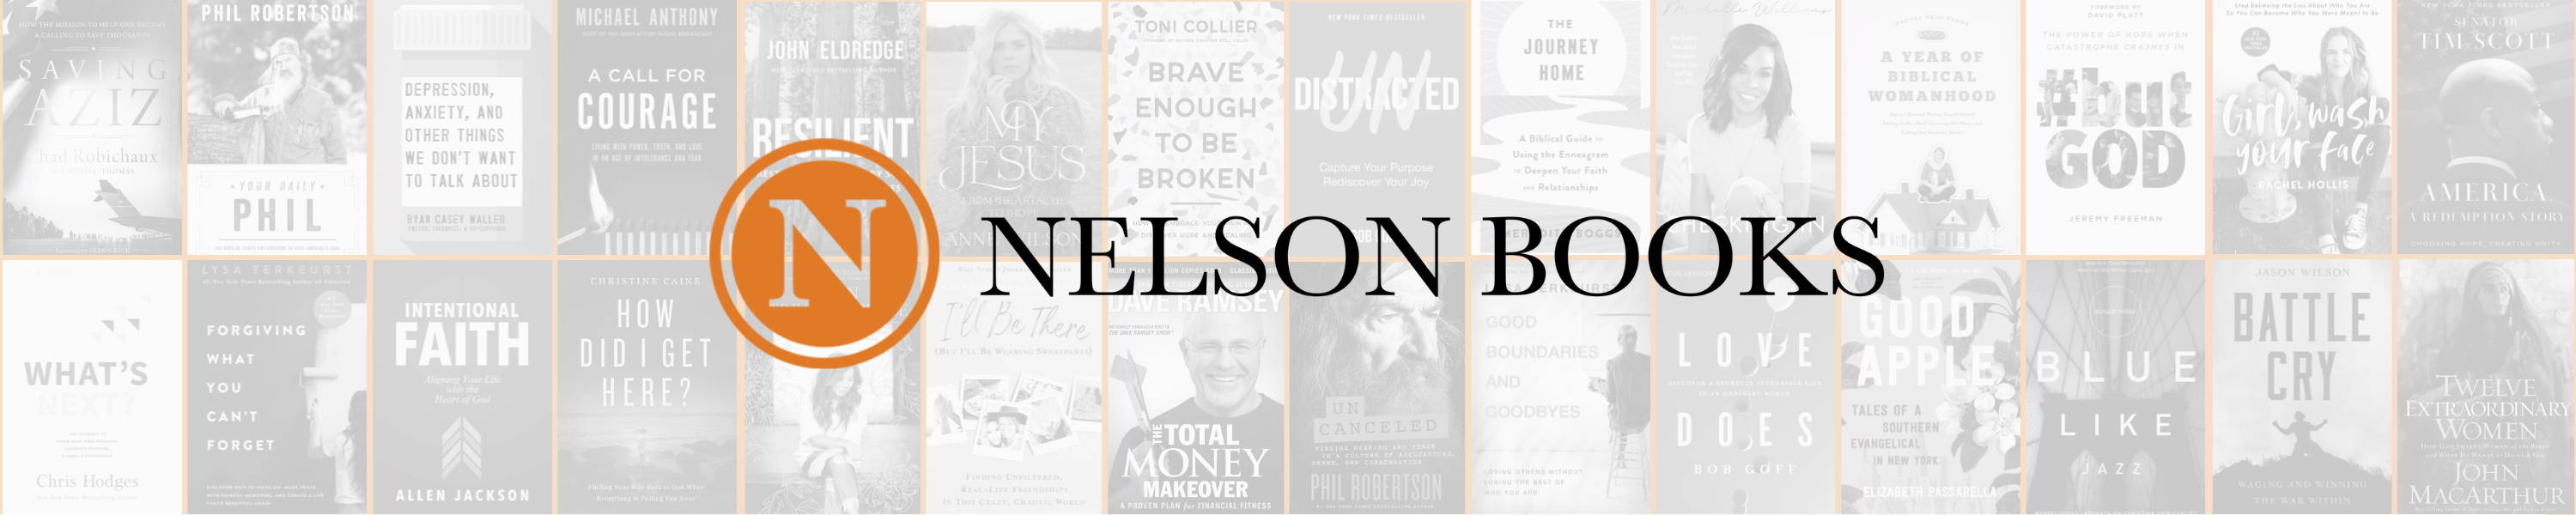 Nelson Books - Personal Growth